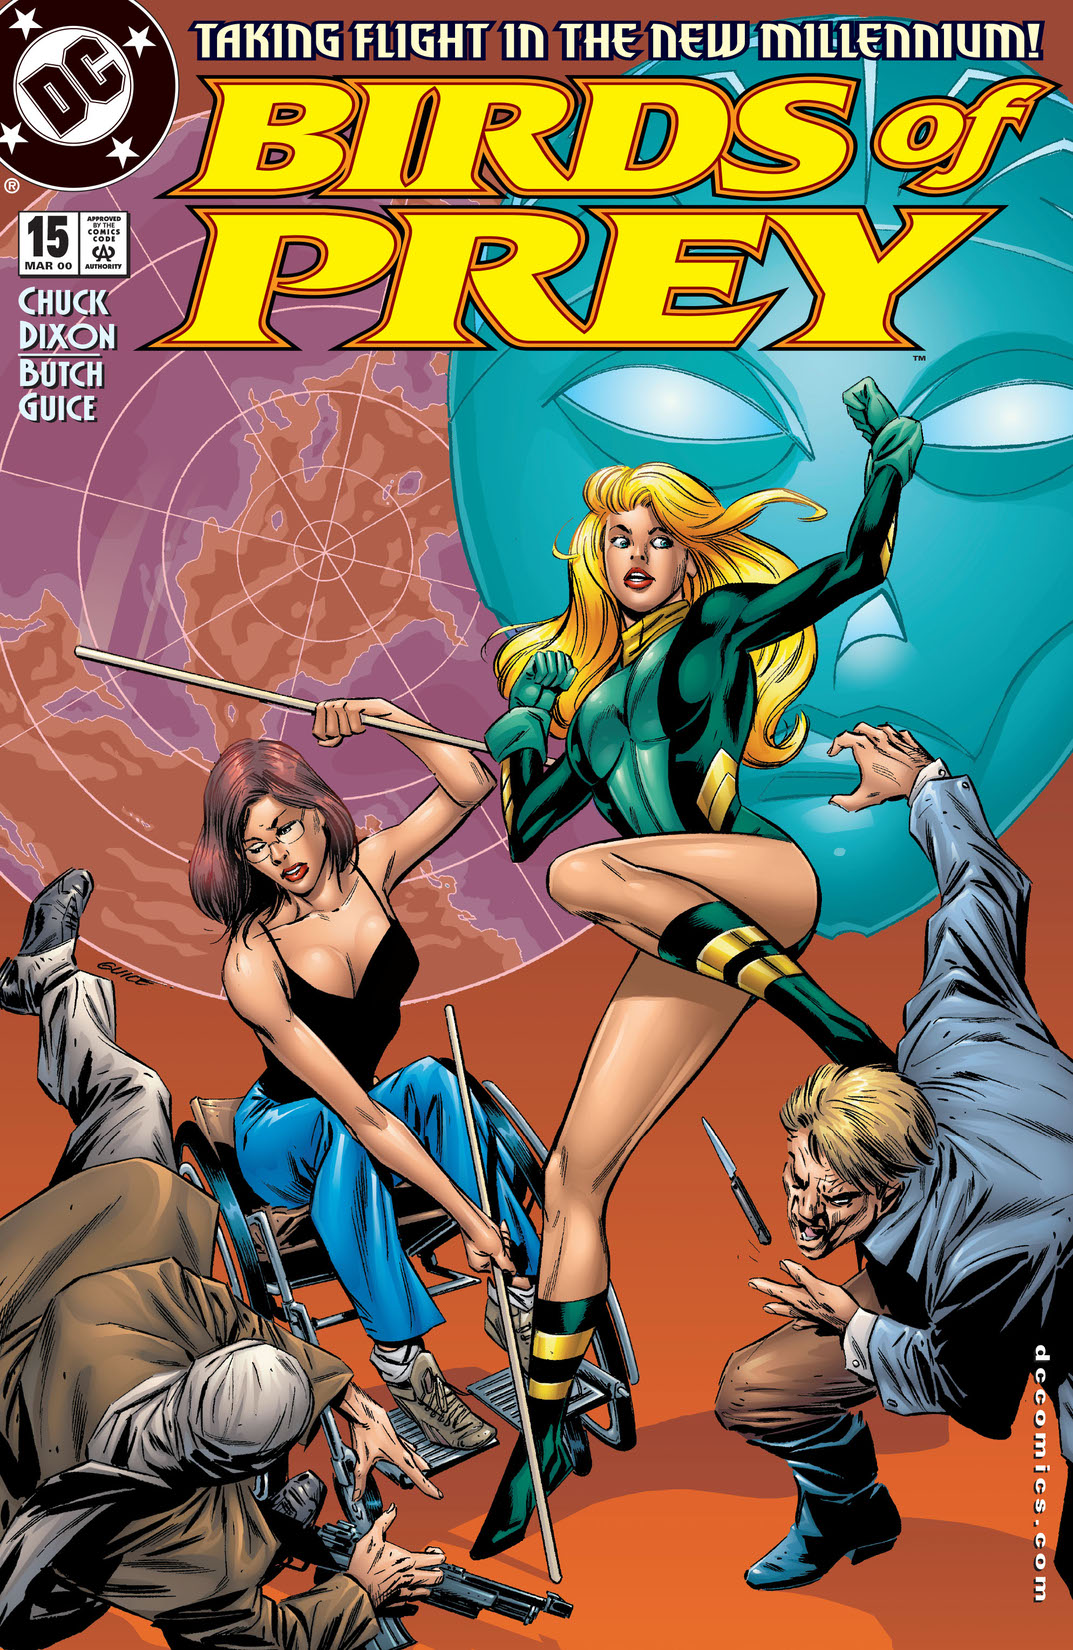 Birds of Prey (1998-) #15 preview images